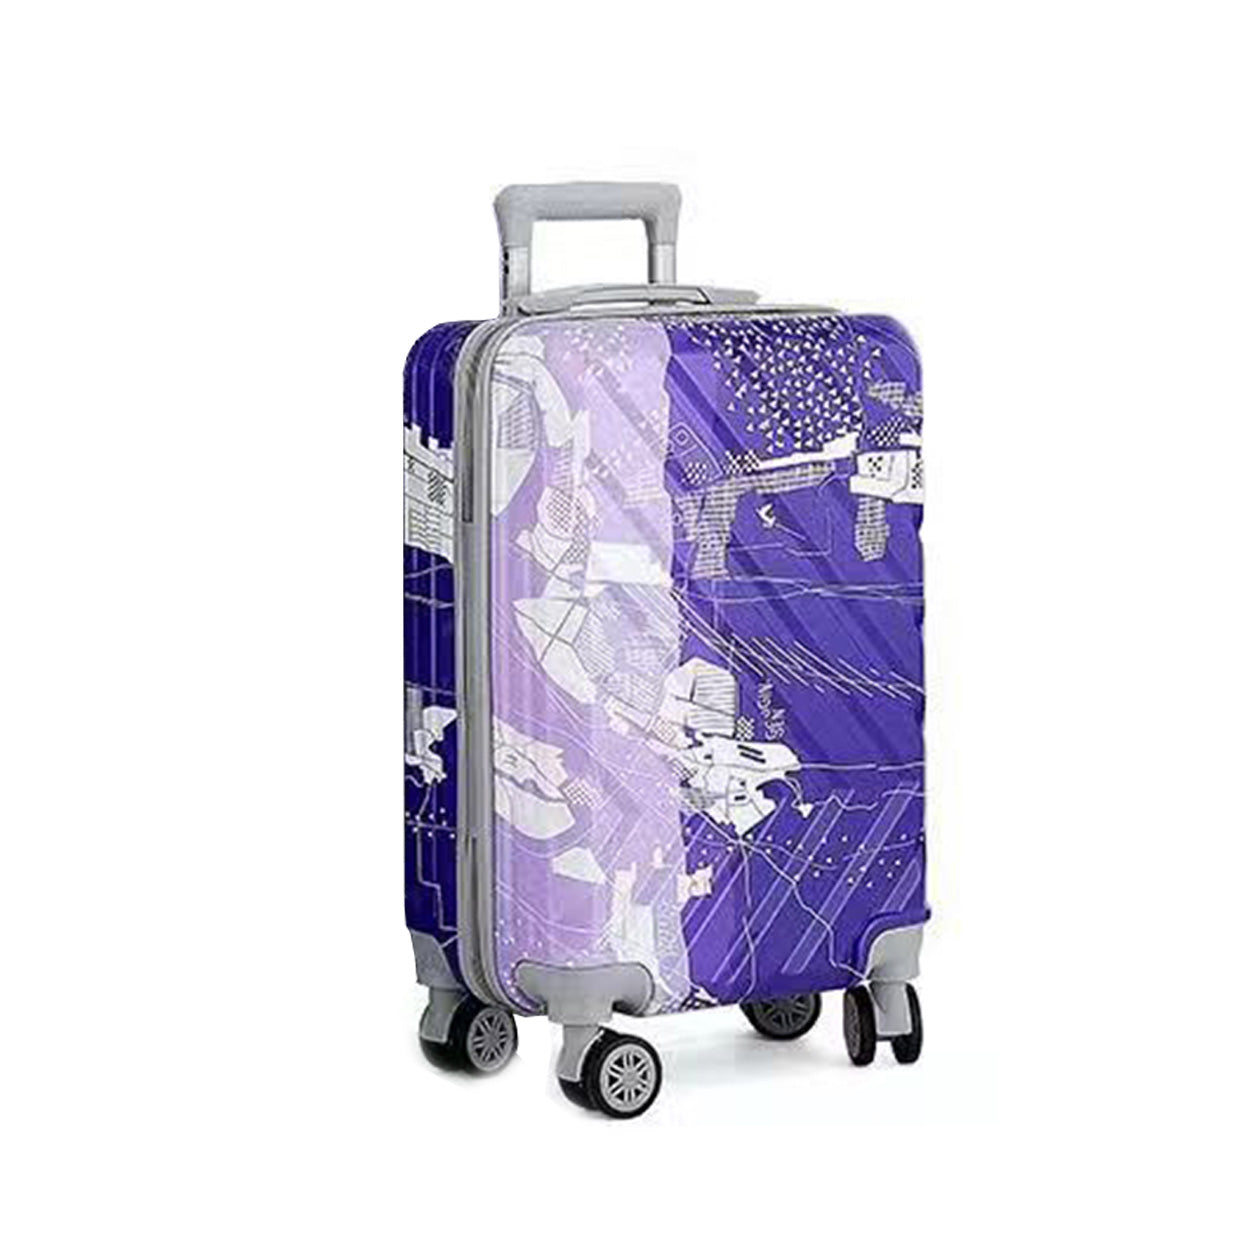 Printed Light Weight ABS luggage Plain Root Blue | Hard Case Trolley Bag | 4 Pcs Set 7" 20" 24" 28 inches